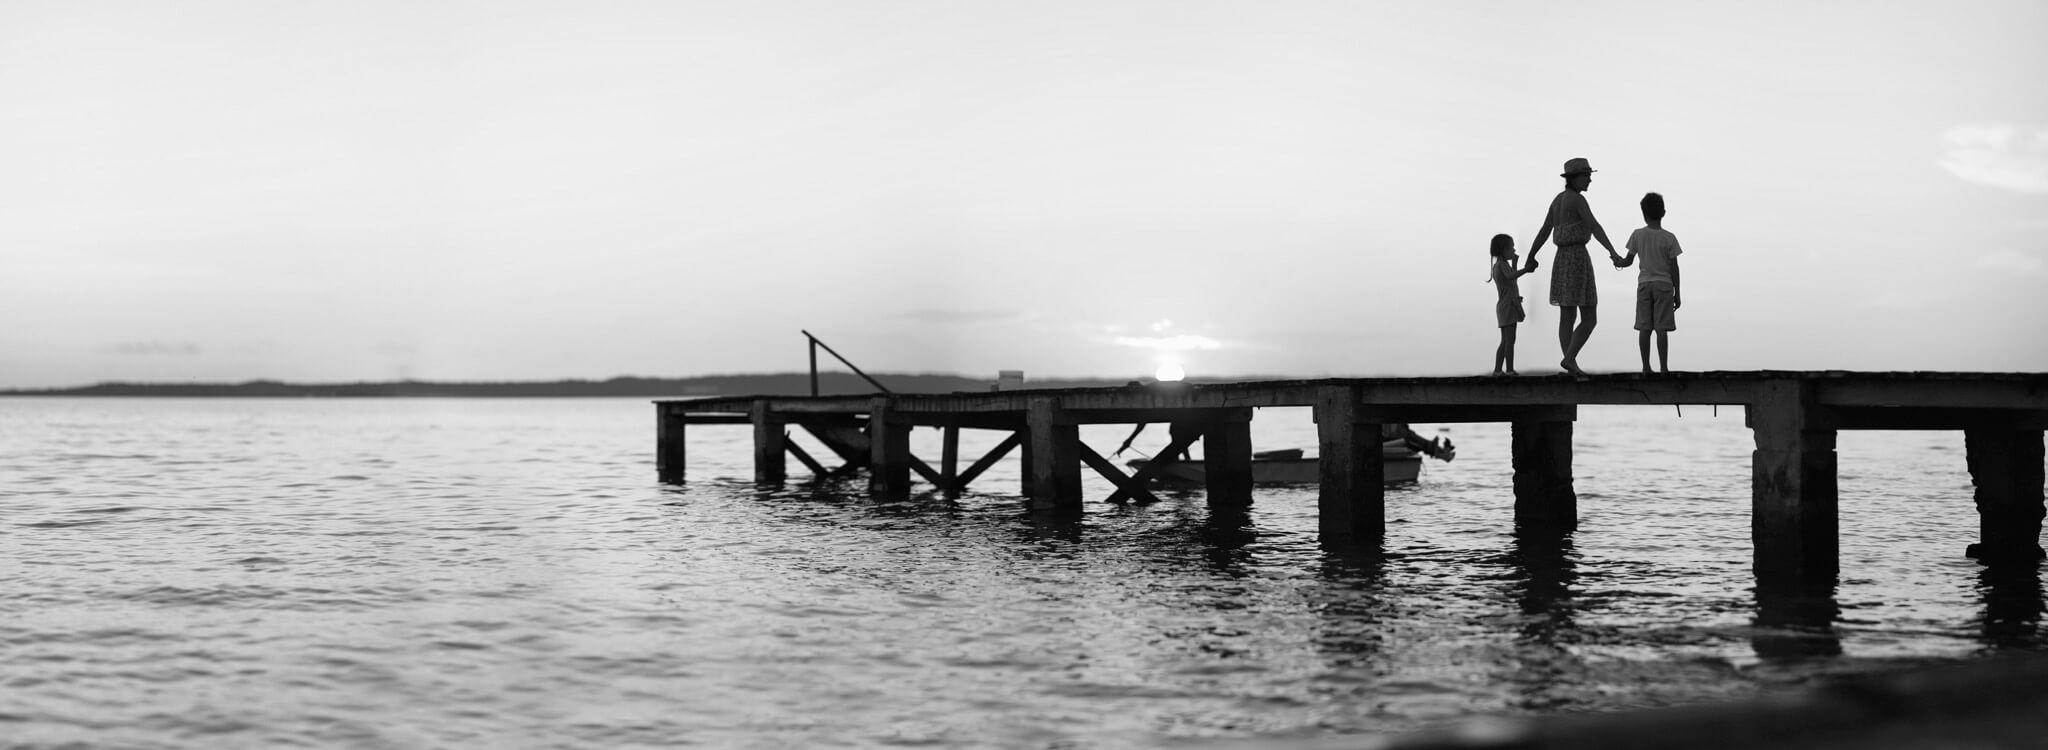 A black and white photo of two people standing on a dock